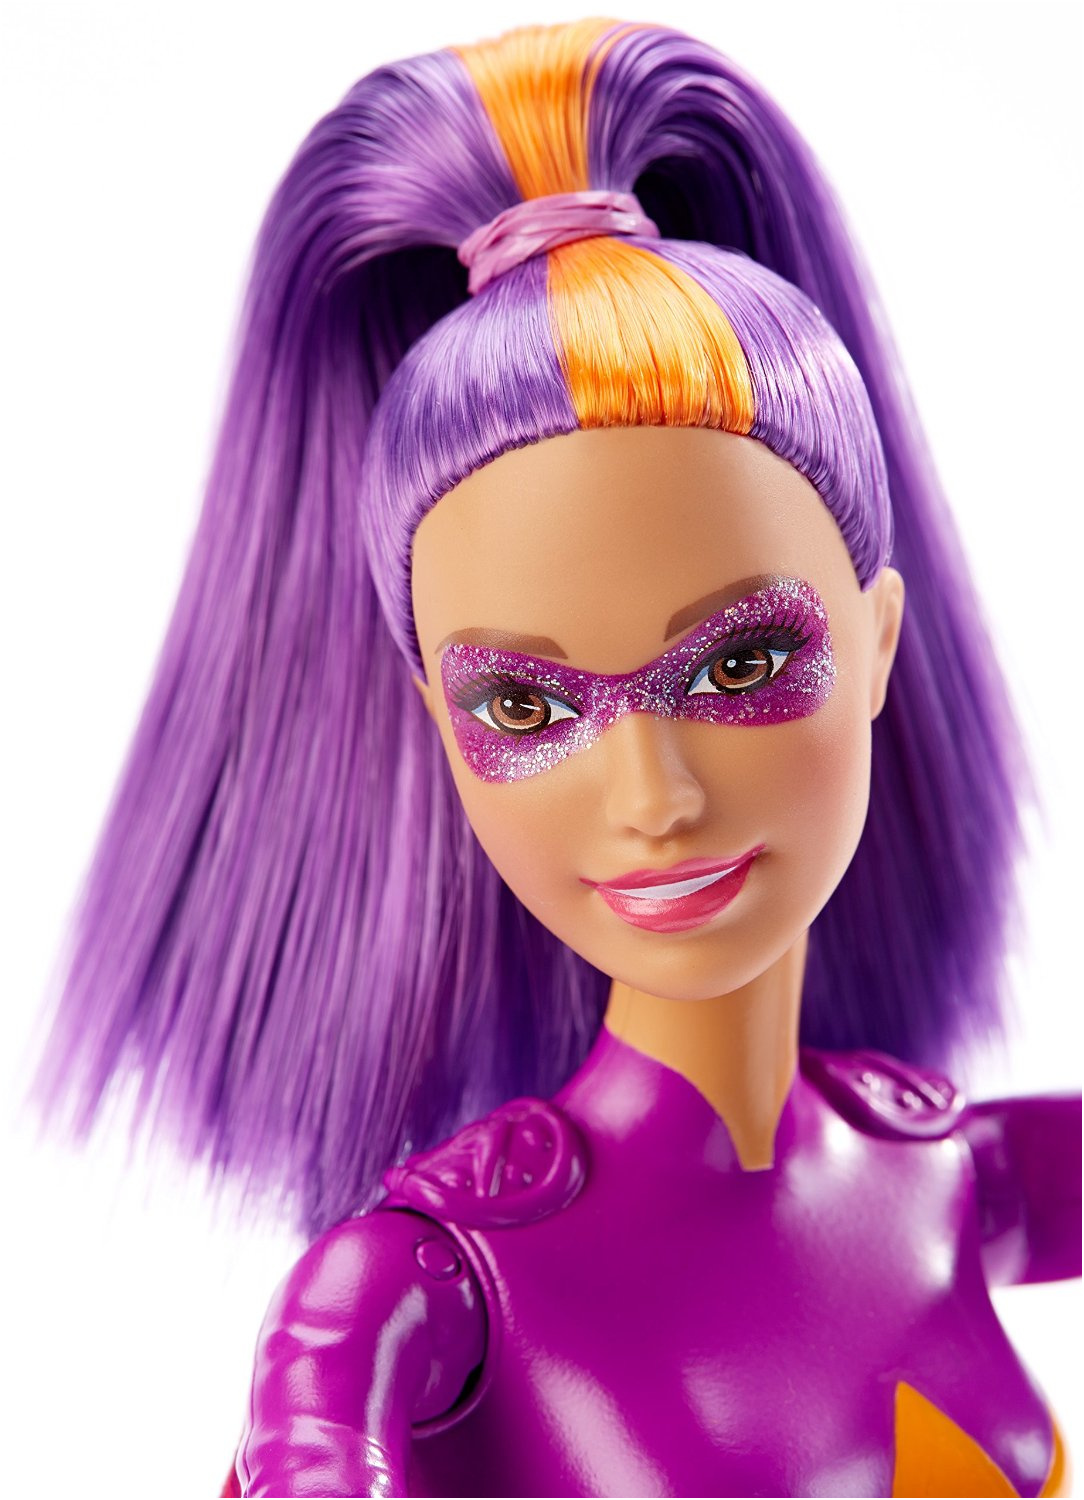 2016 news about the barbie dolls